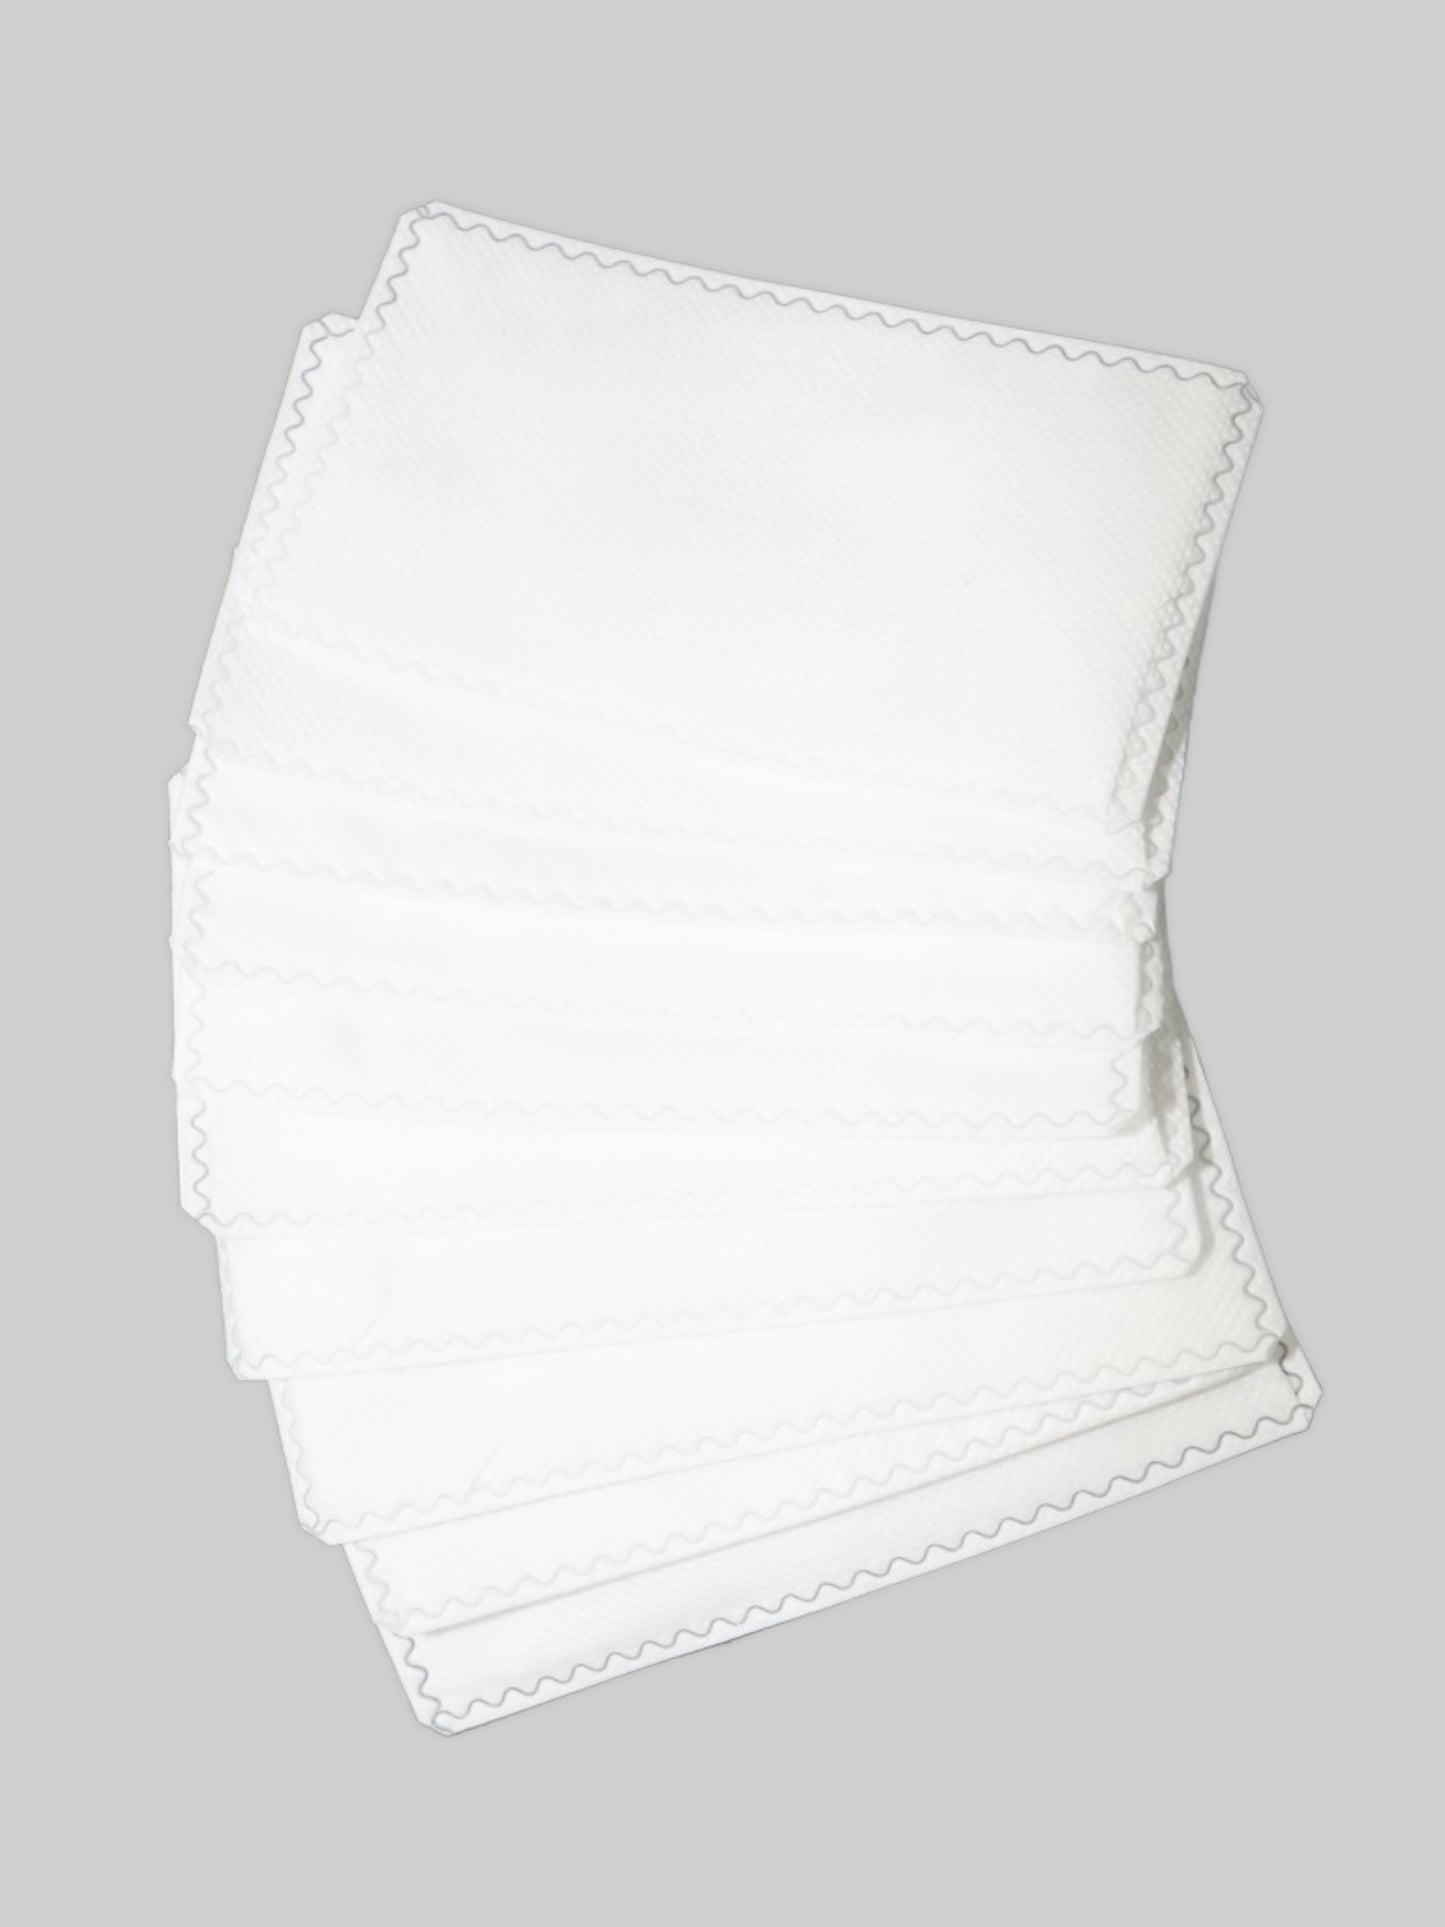 10 Pack Disposable Filters for Reusable Face Masks